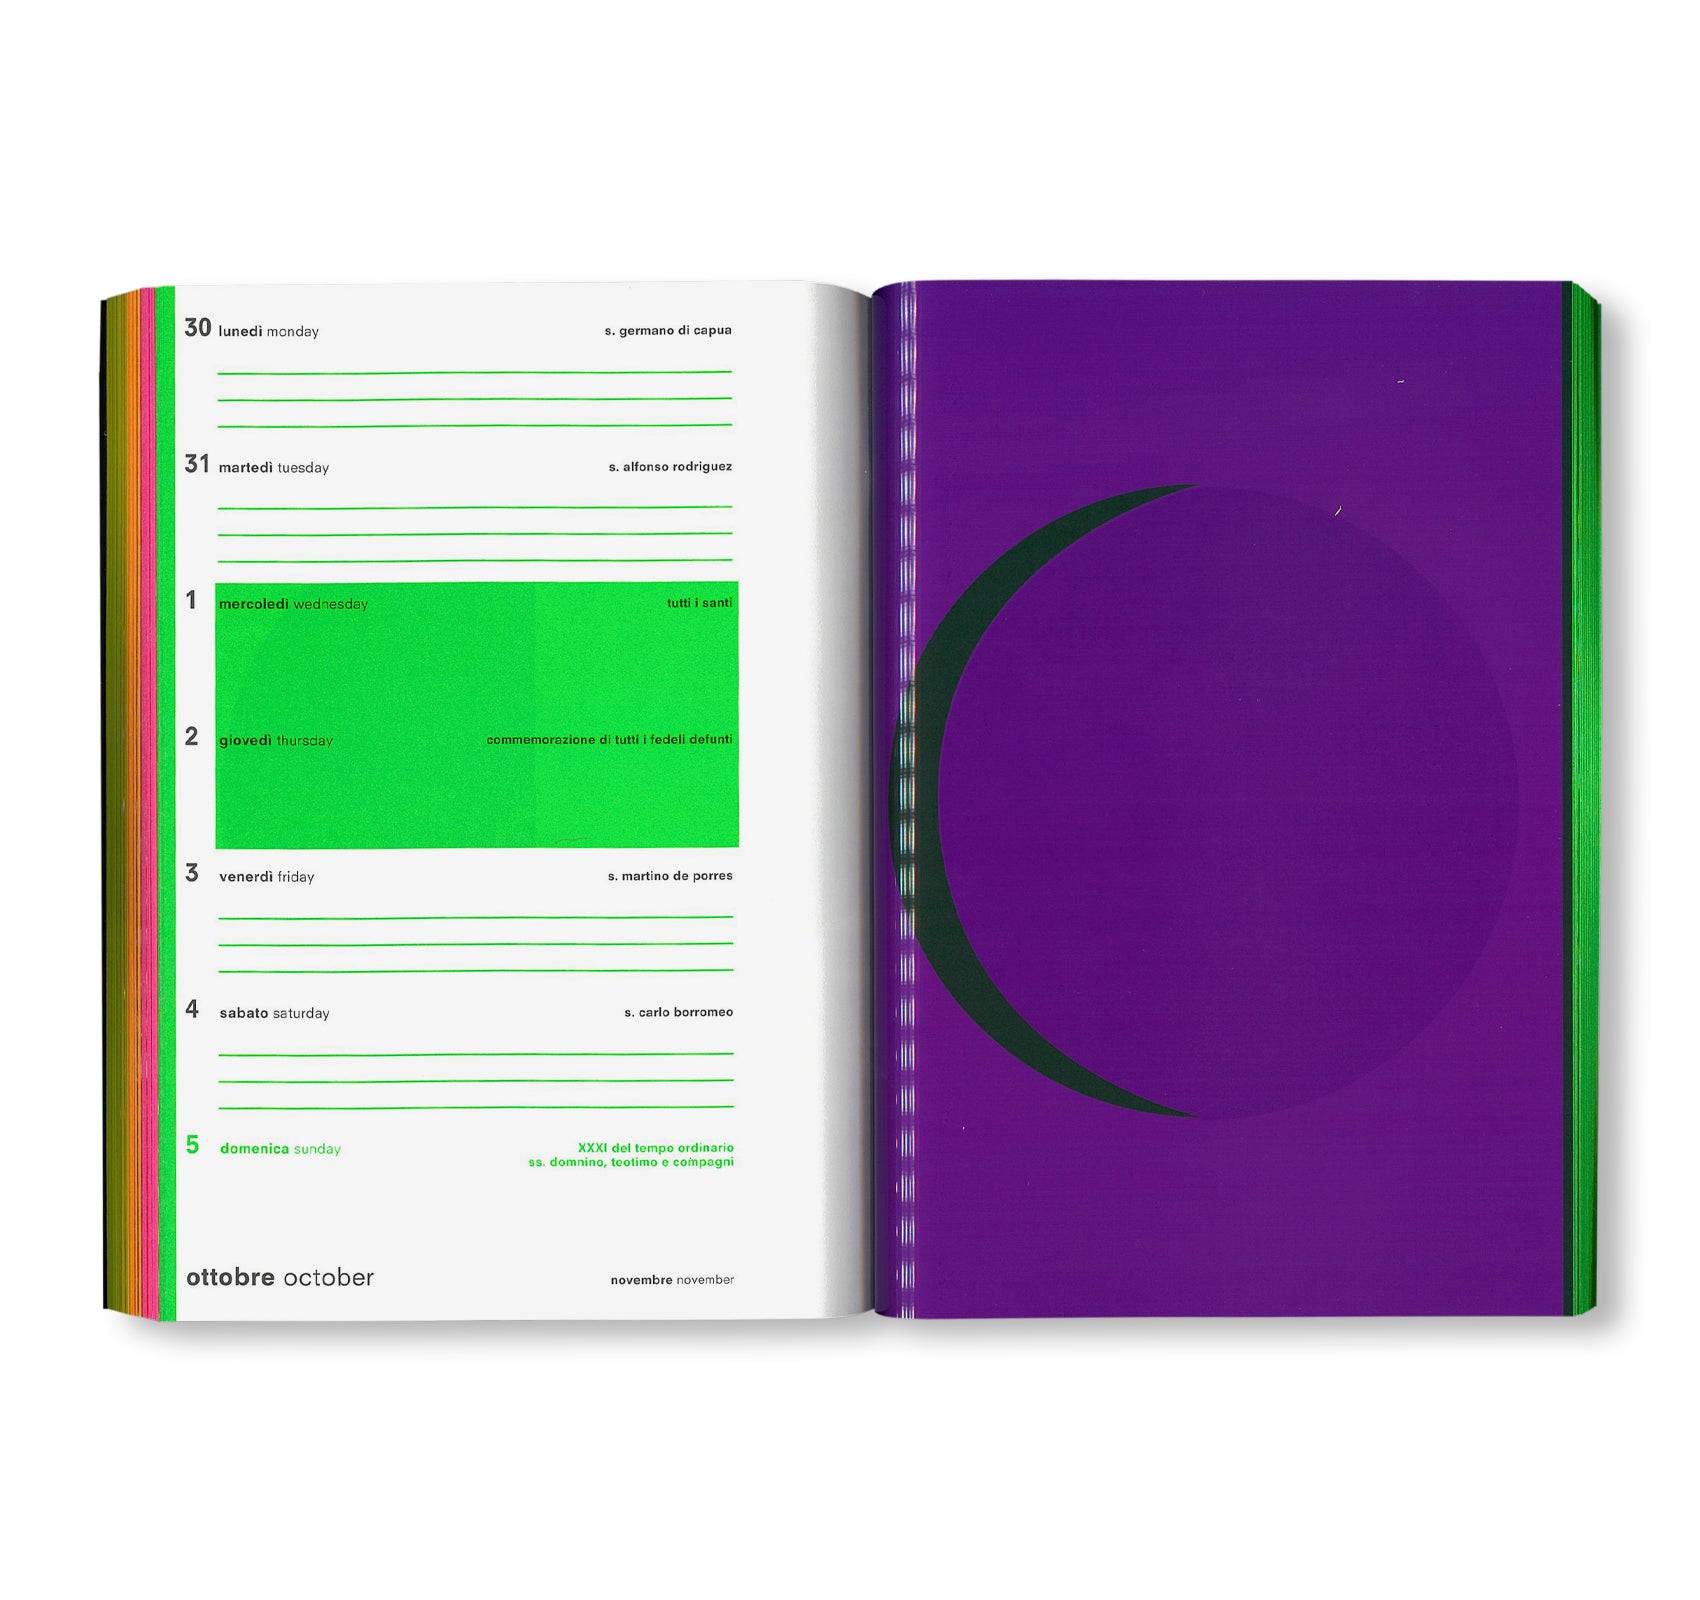 FUTURISMOON AGENDA 2023 - VATICAN APOSTOLIC LIBRARY 2023 OFFICIAL DAILY PLANNER [LIMITED & COLLECTORS' EDITION]